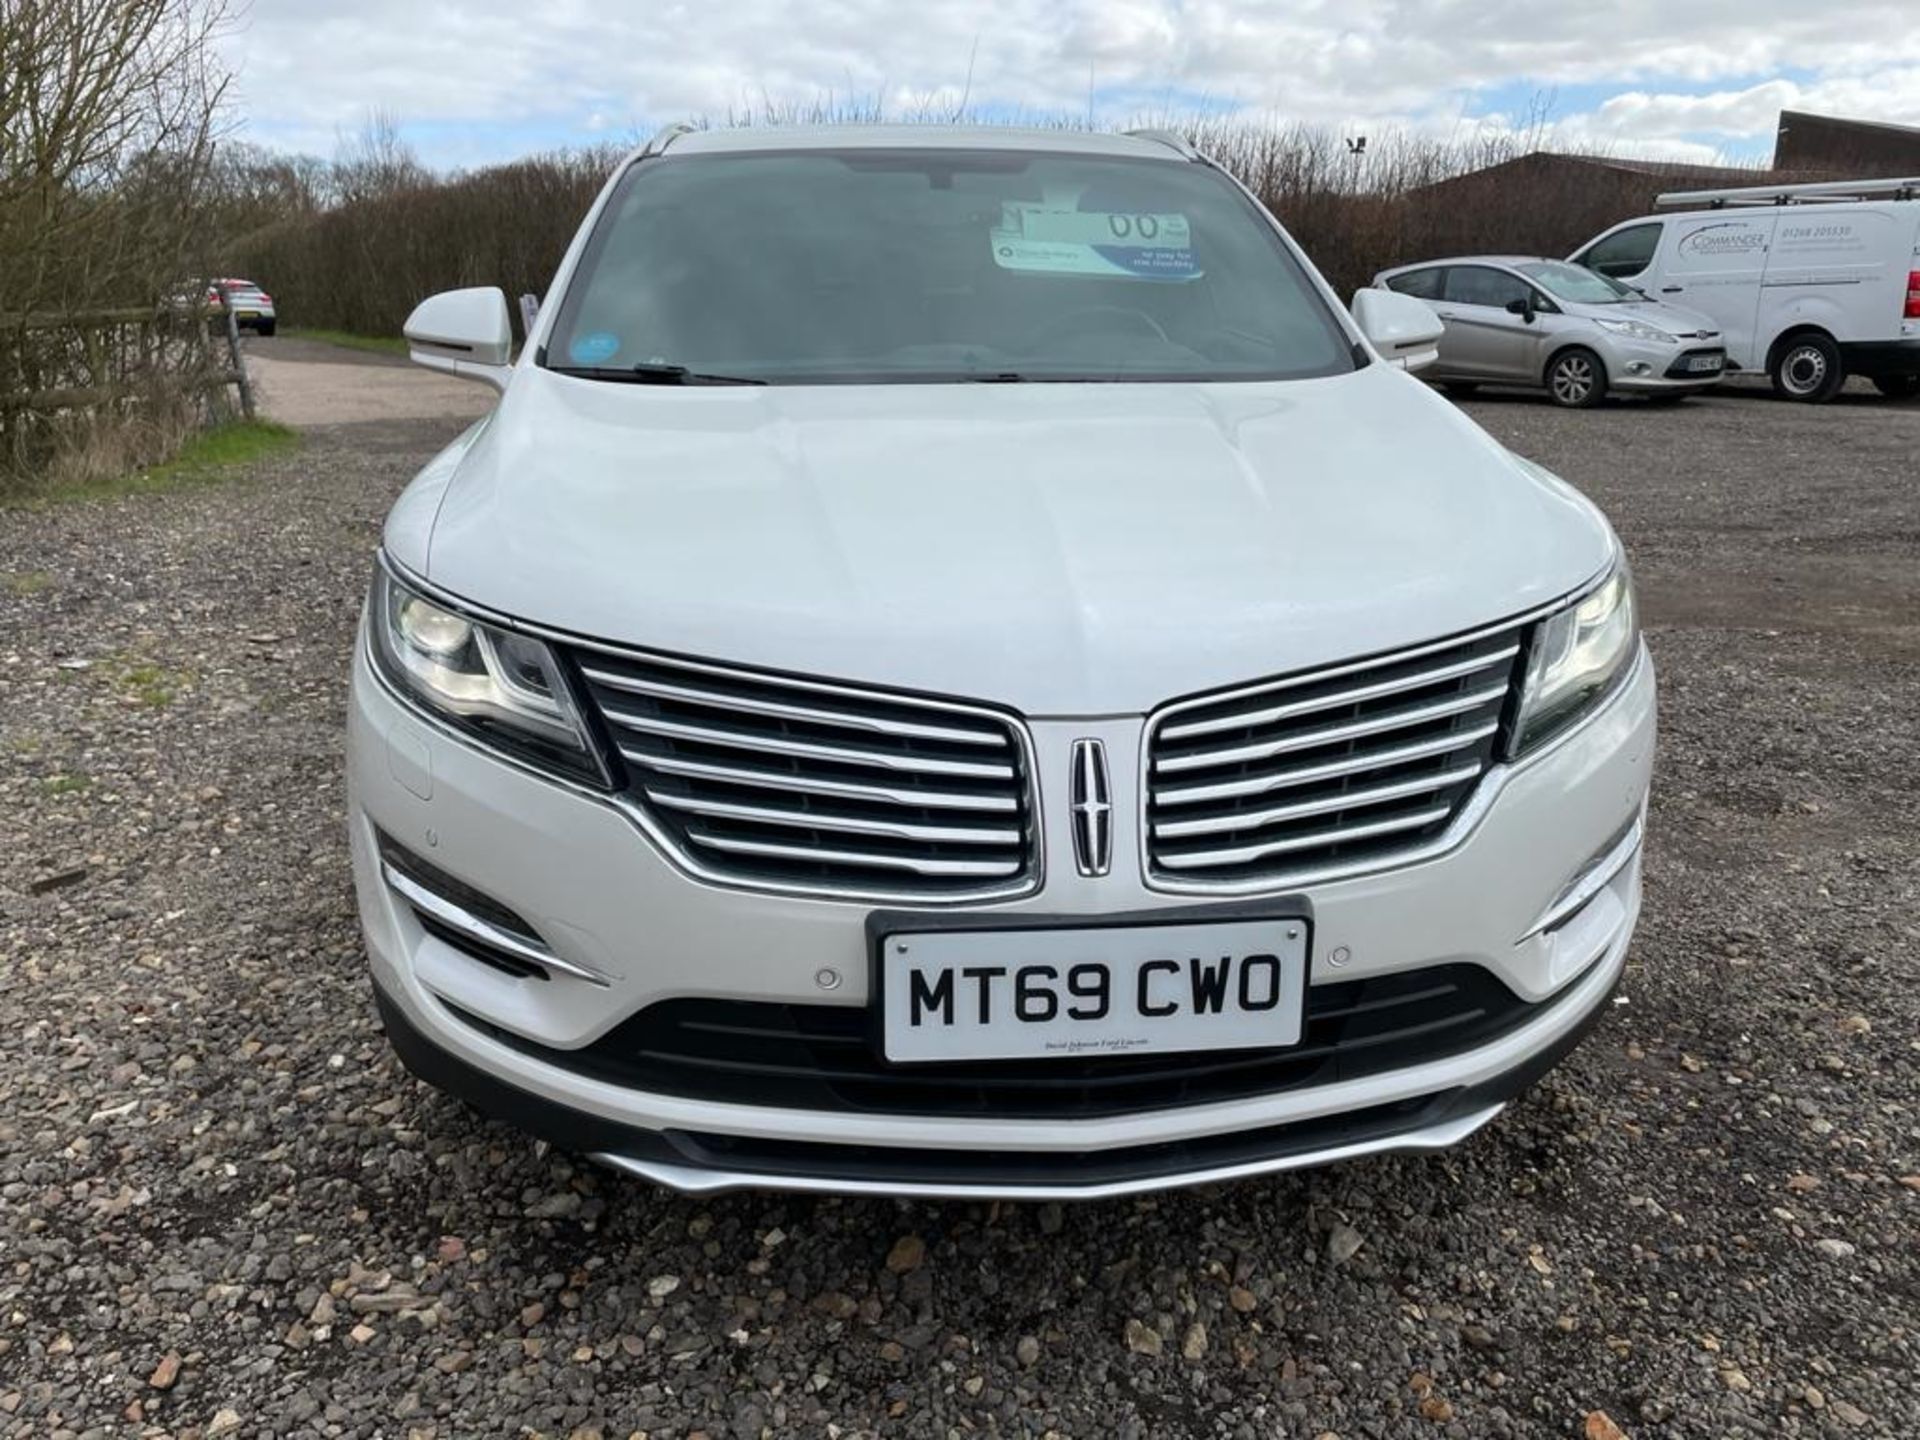 69 REG LINCOLN MKC RESERVE 2.0L ECOBOOST, 200bhp, PLATINUM WHITE WITH CAPPUCCINO LEATHER INTERIOR - Image 2 of 13